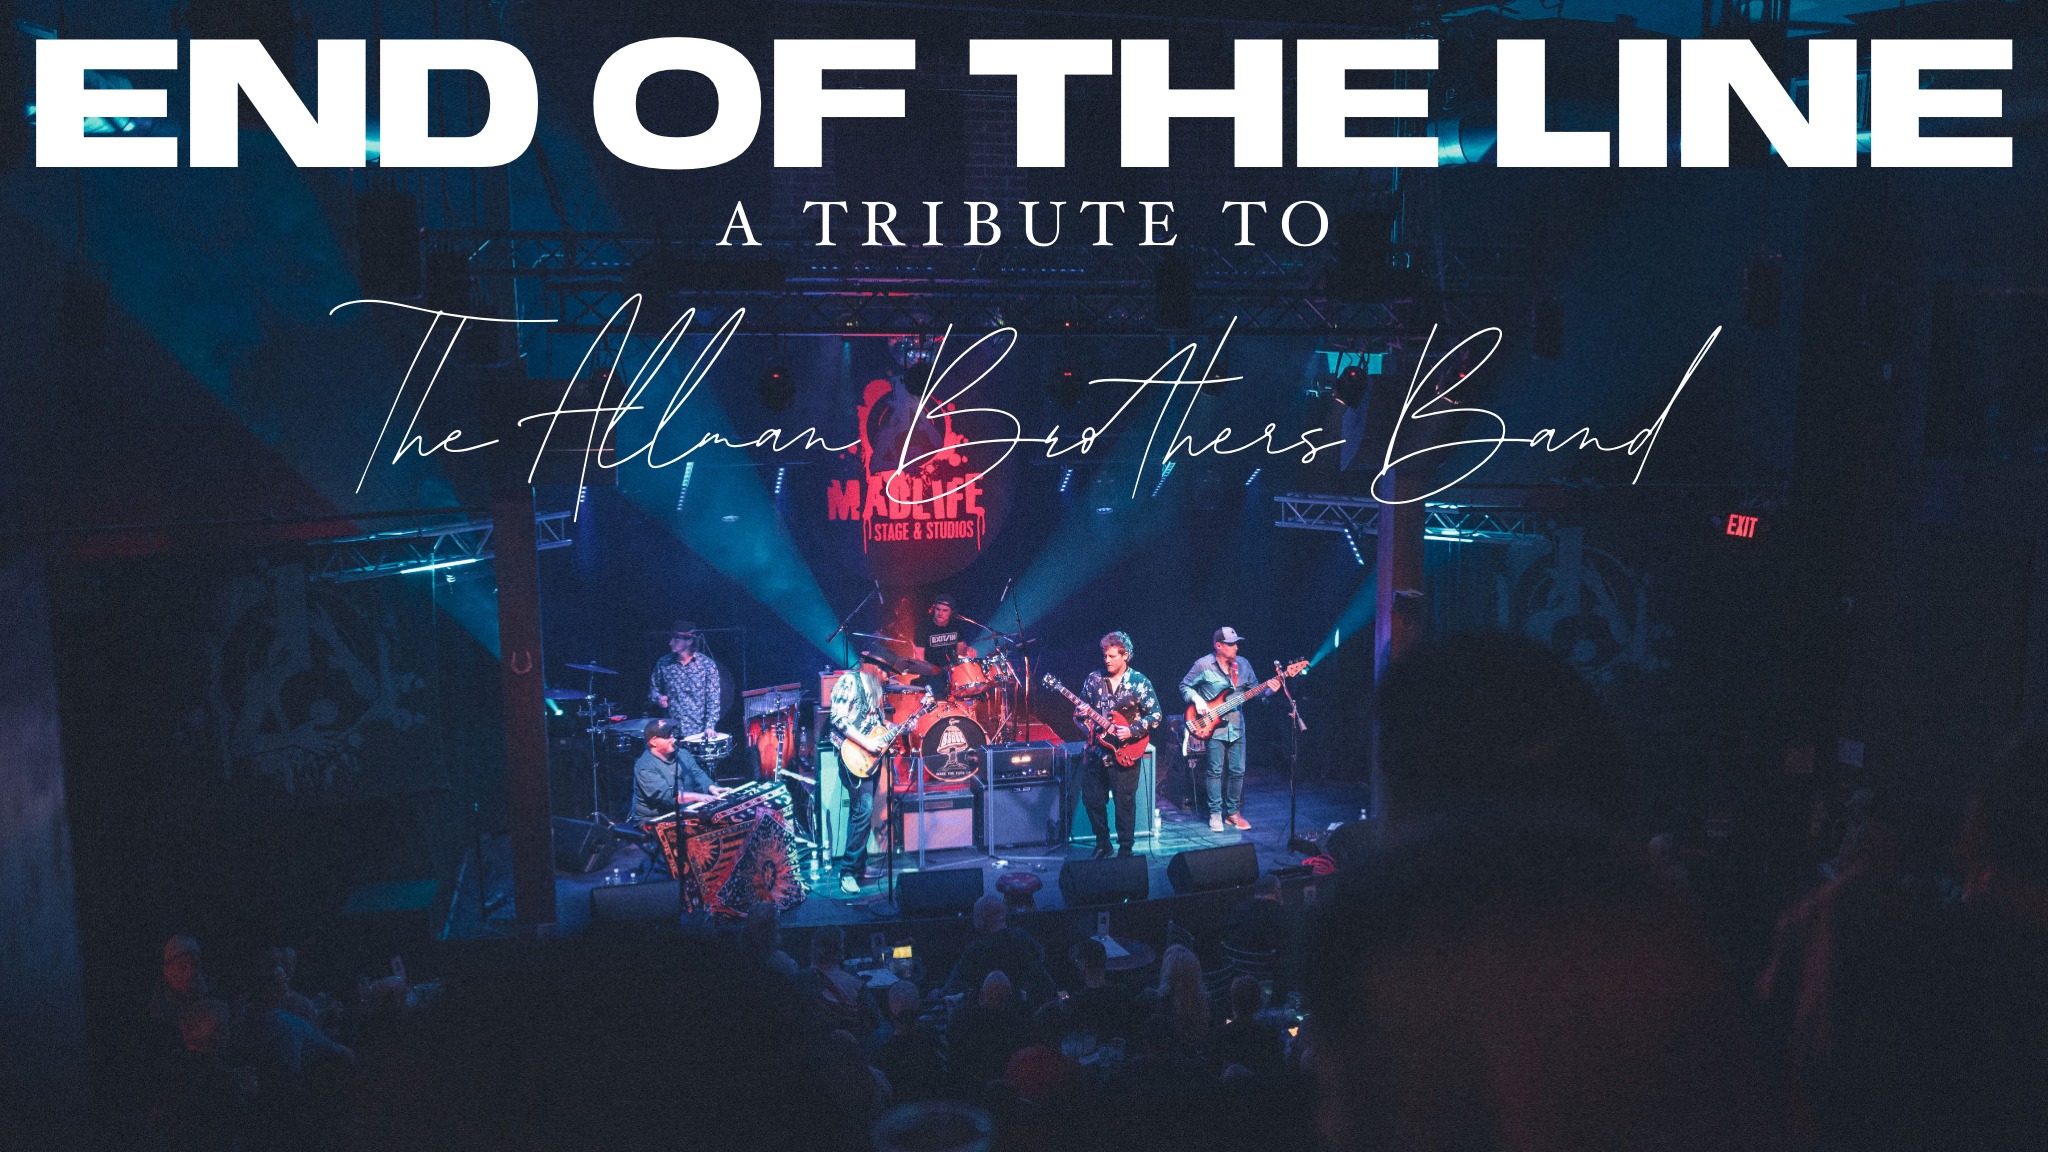 End of the Line: A Tribute to the Allman Brothers Band